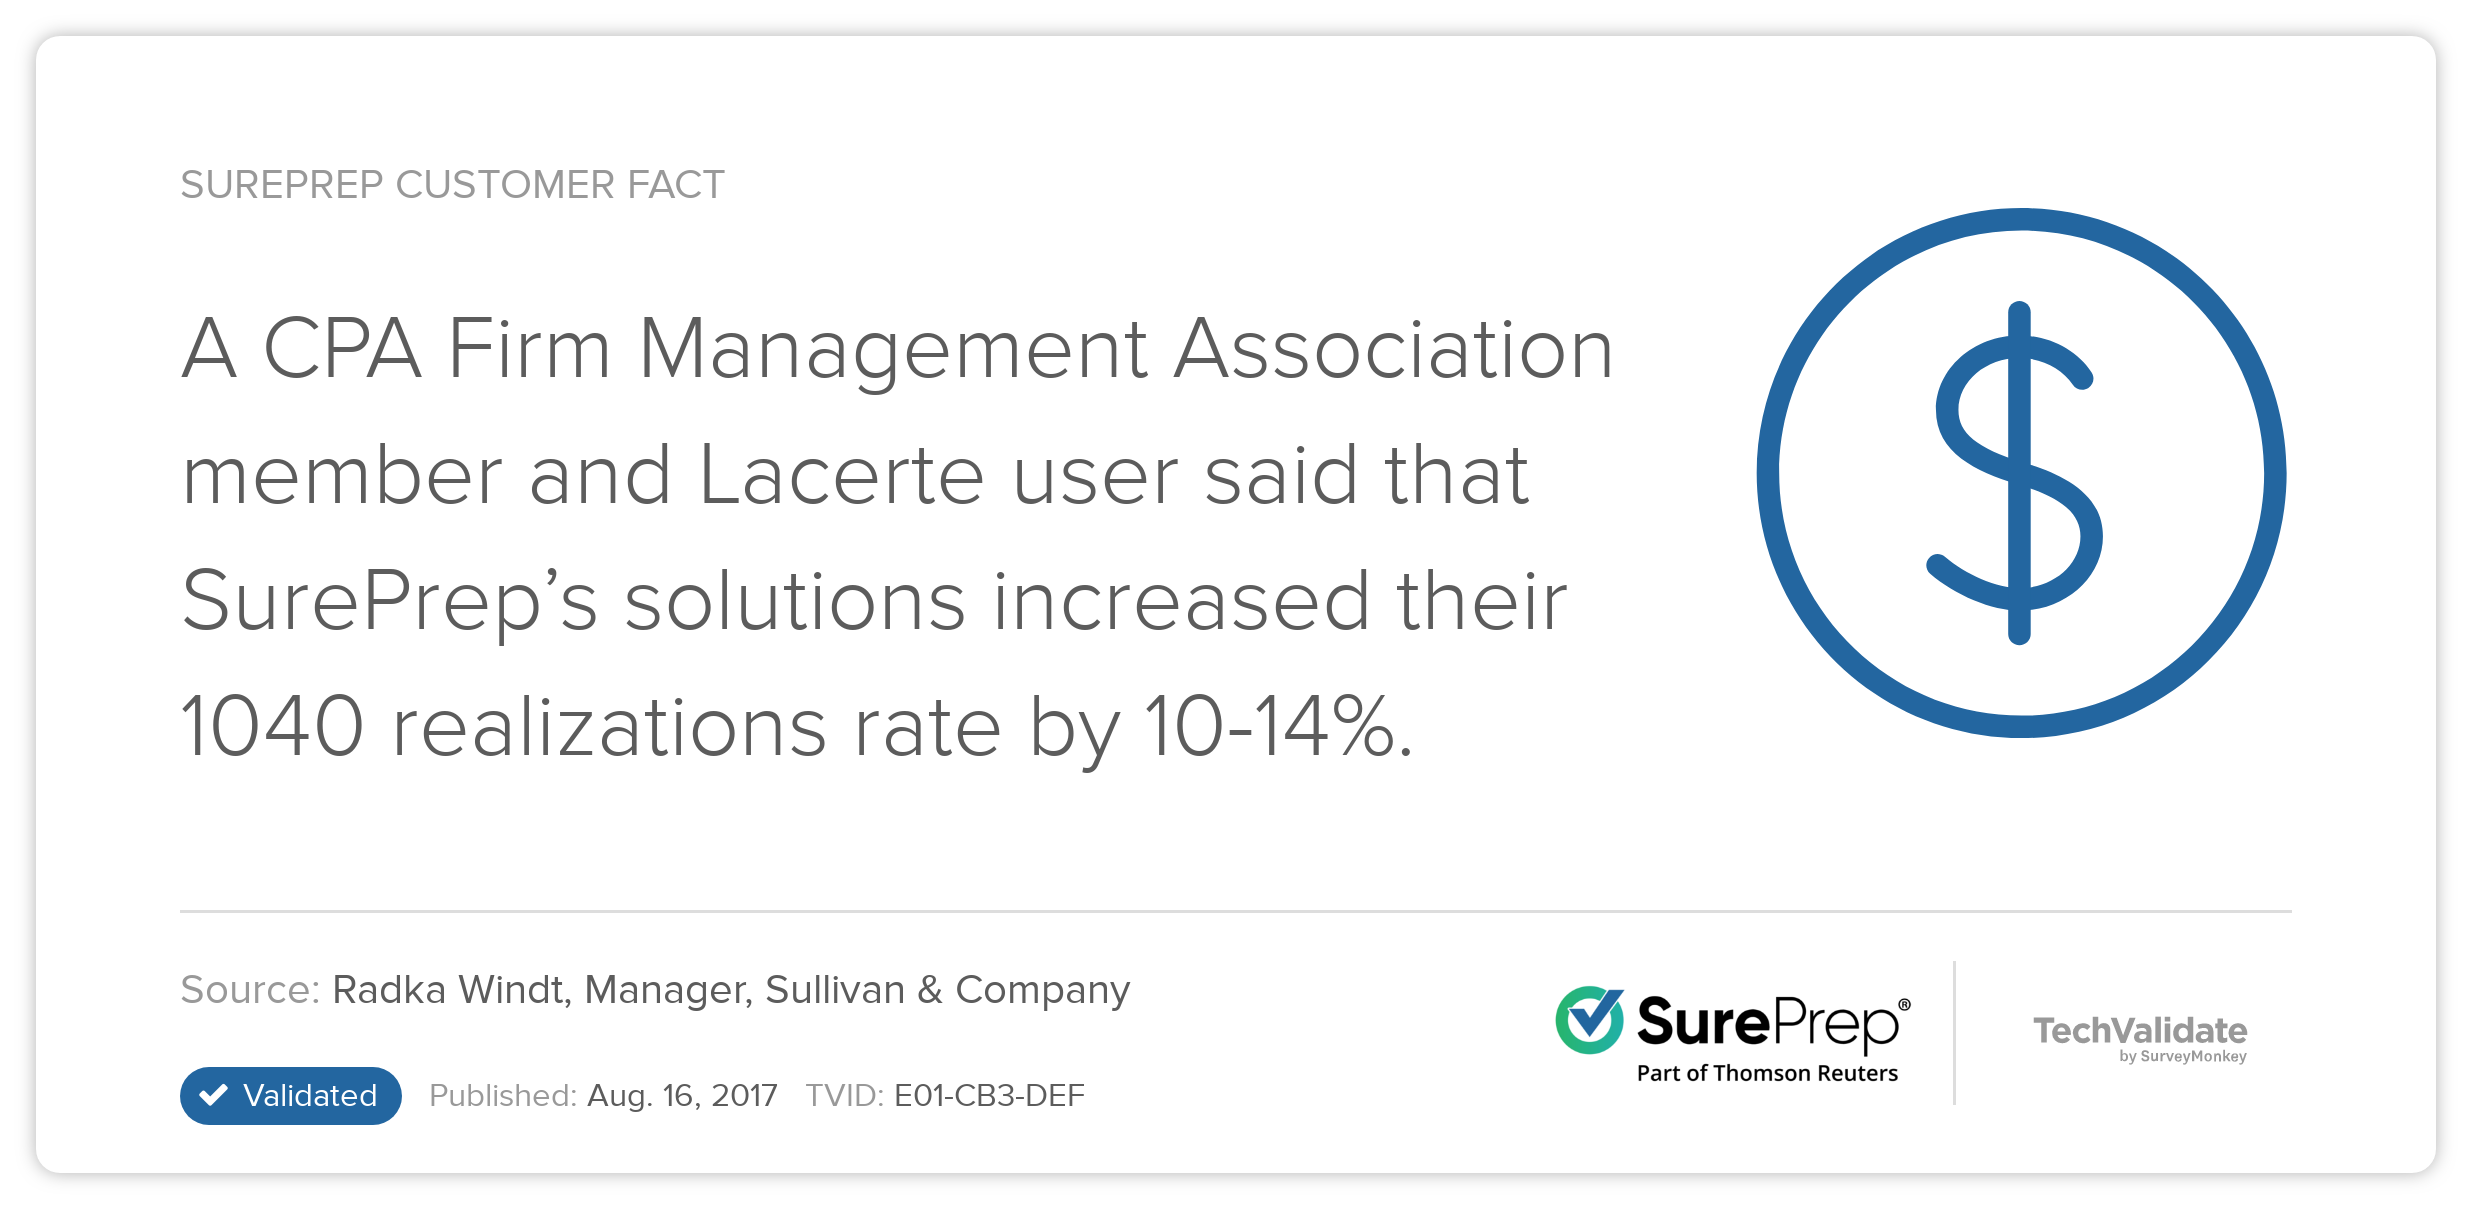 A CPA Firm Management Association member and Lacerte user said that SurePrep's solutions increased their 1040 realizations rate by 10-14%.